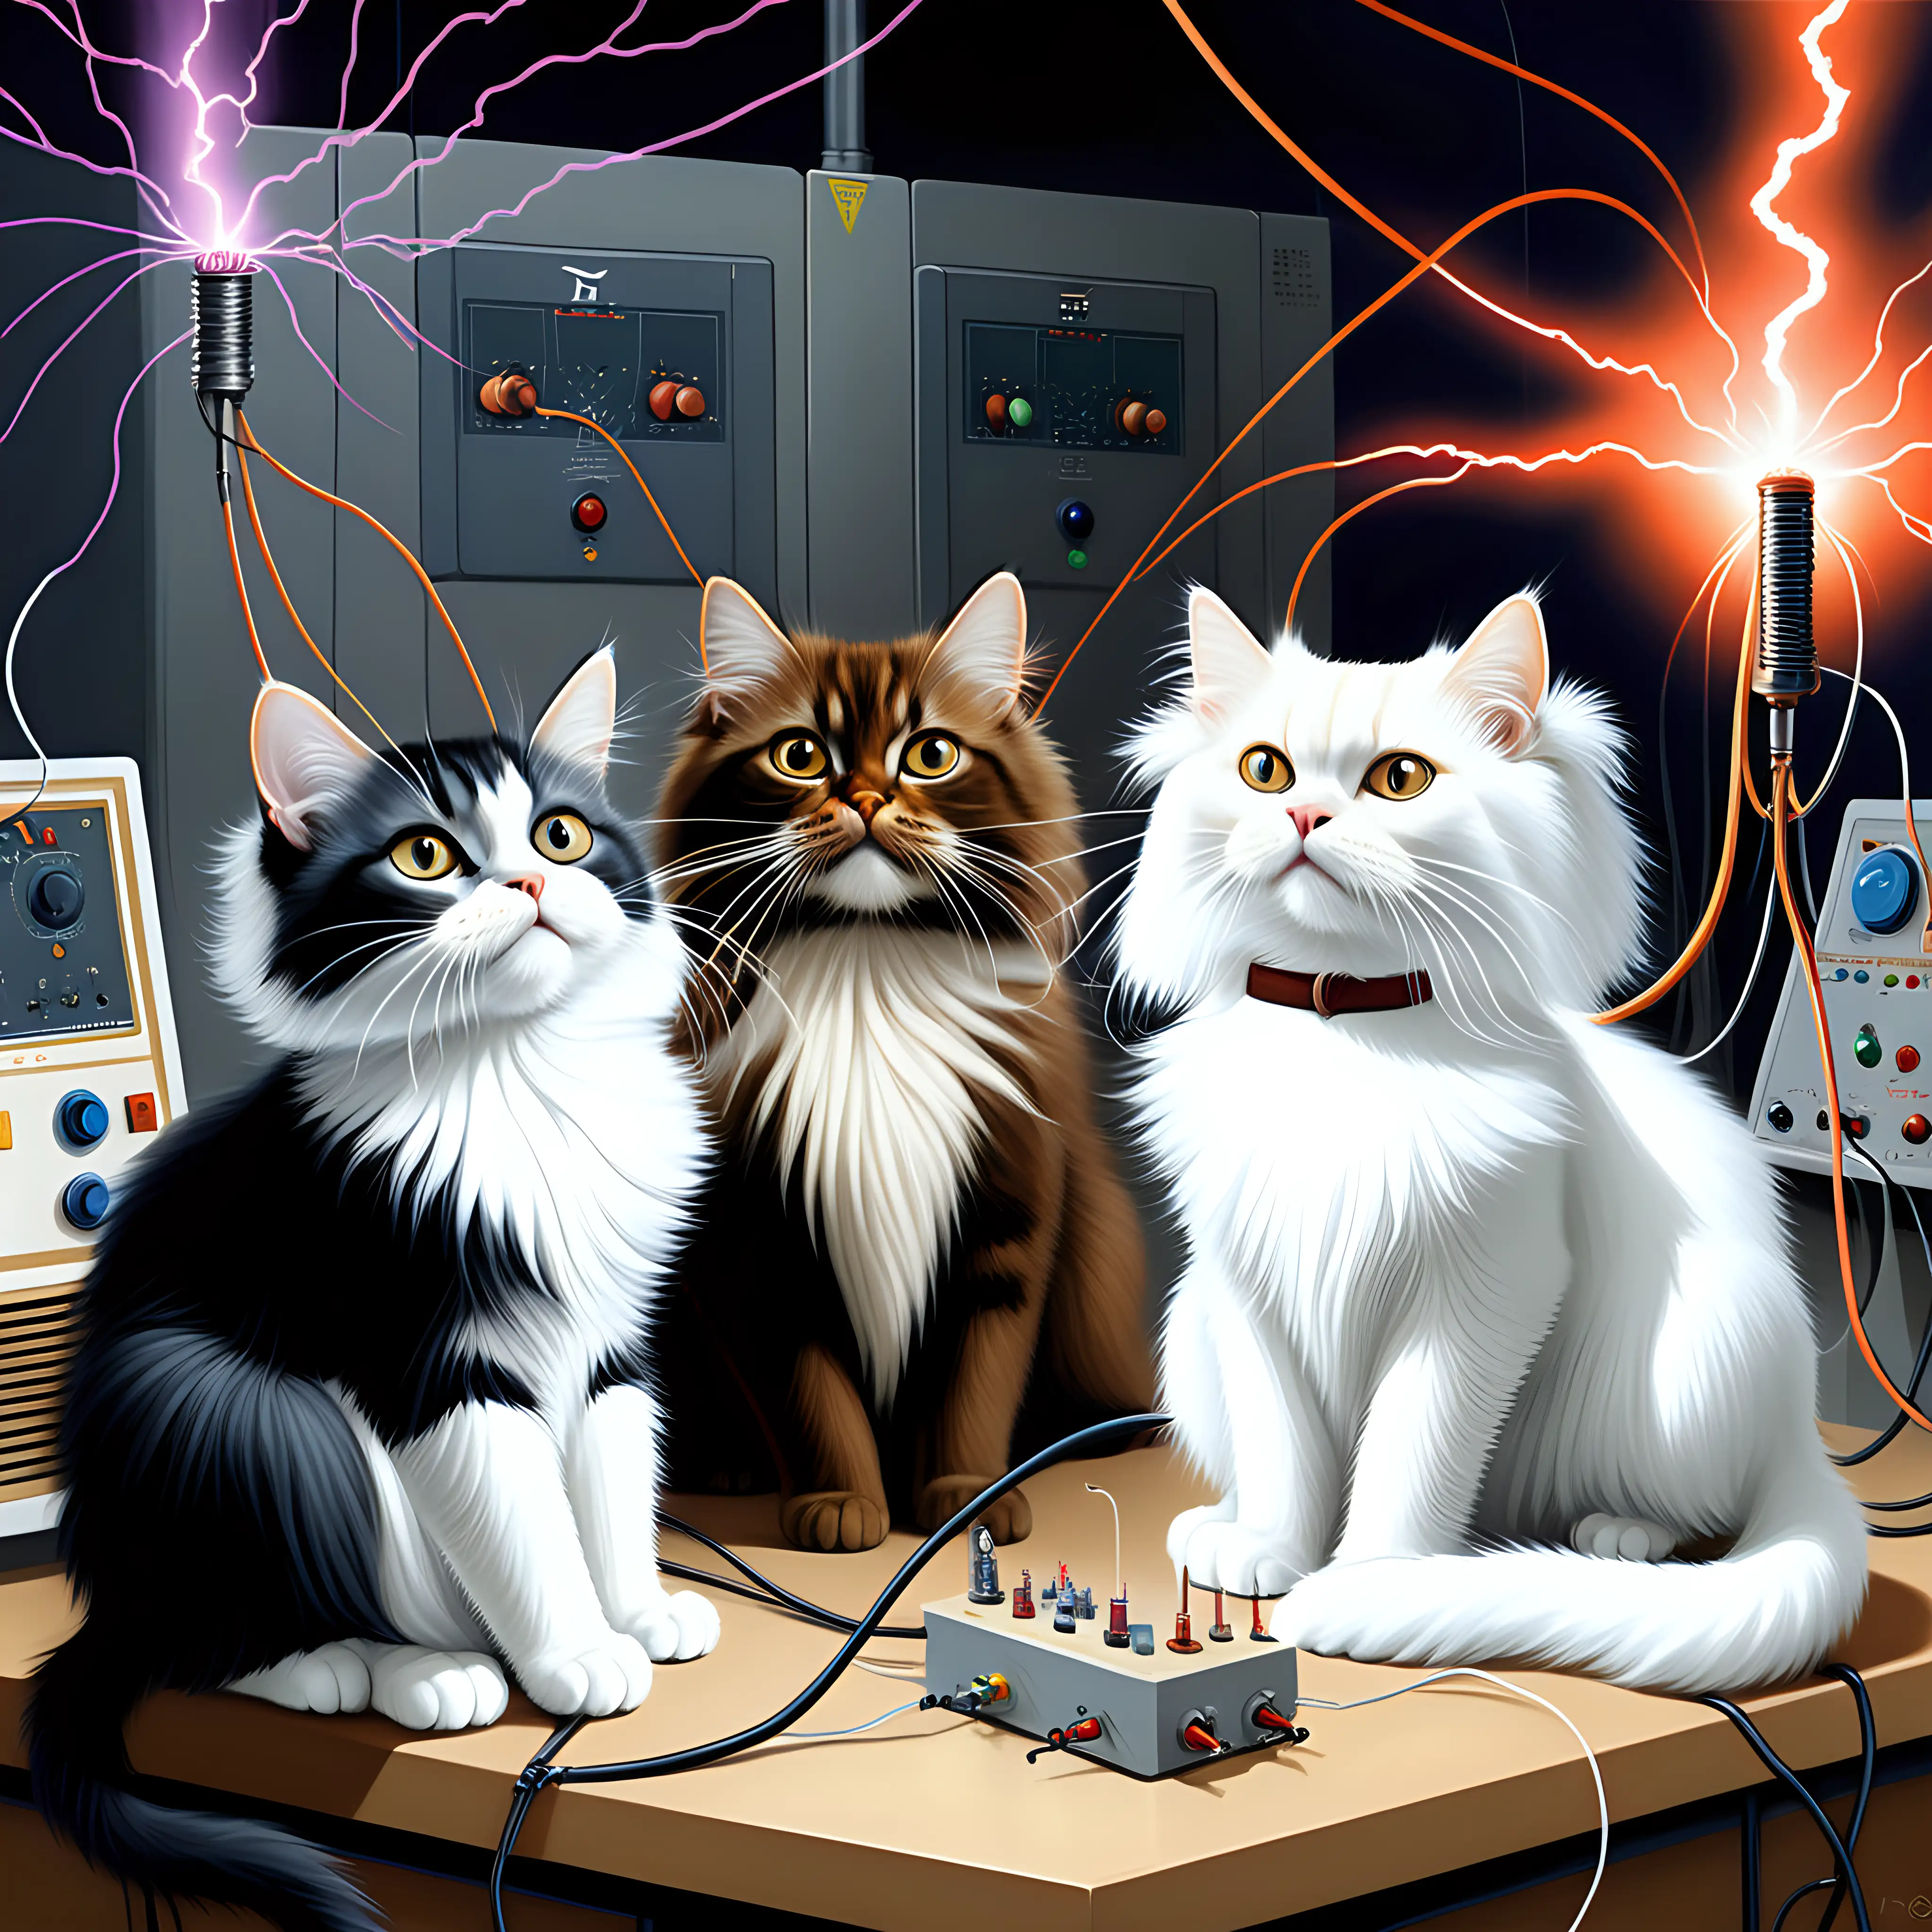 surrealistic painting of 4 cats playing in a electric labo with a tesla coil. 1 cat is shorthaired and white. 1 cat is longhaired and white. 1 cat is longhaired with a white belly, a white chin and al the rest brown colored. 1 cat is longhaired with a white belly, a white chin and al the rest black colored.